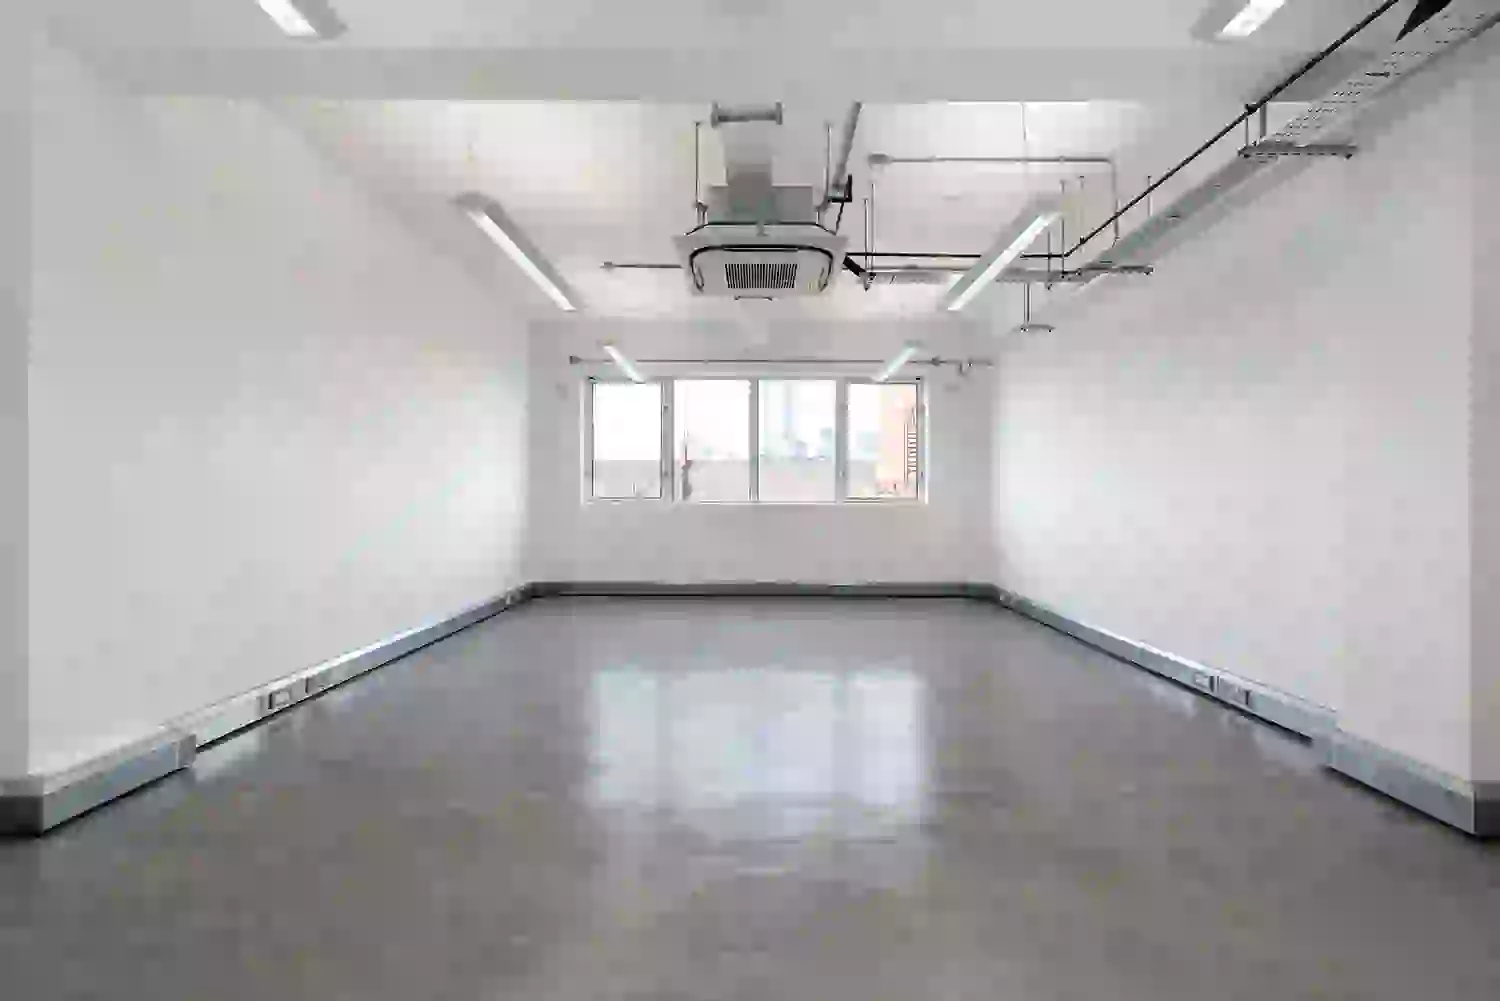 Office space to rent at Vox Studios, 1-45 Durham Street, London, unit WS.N301A, 435 sq ft (40 sq m).